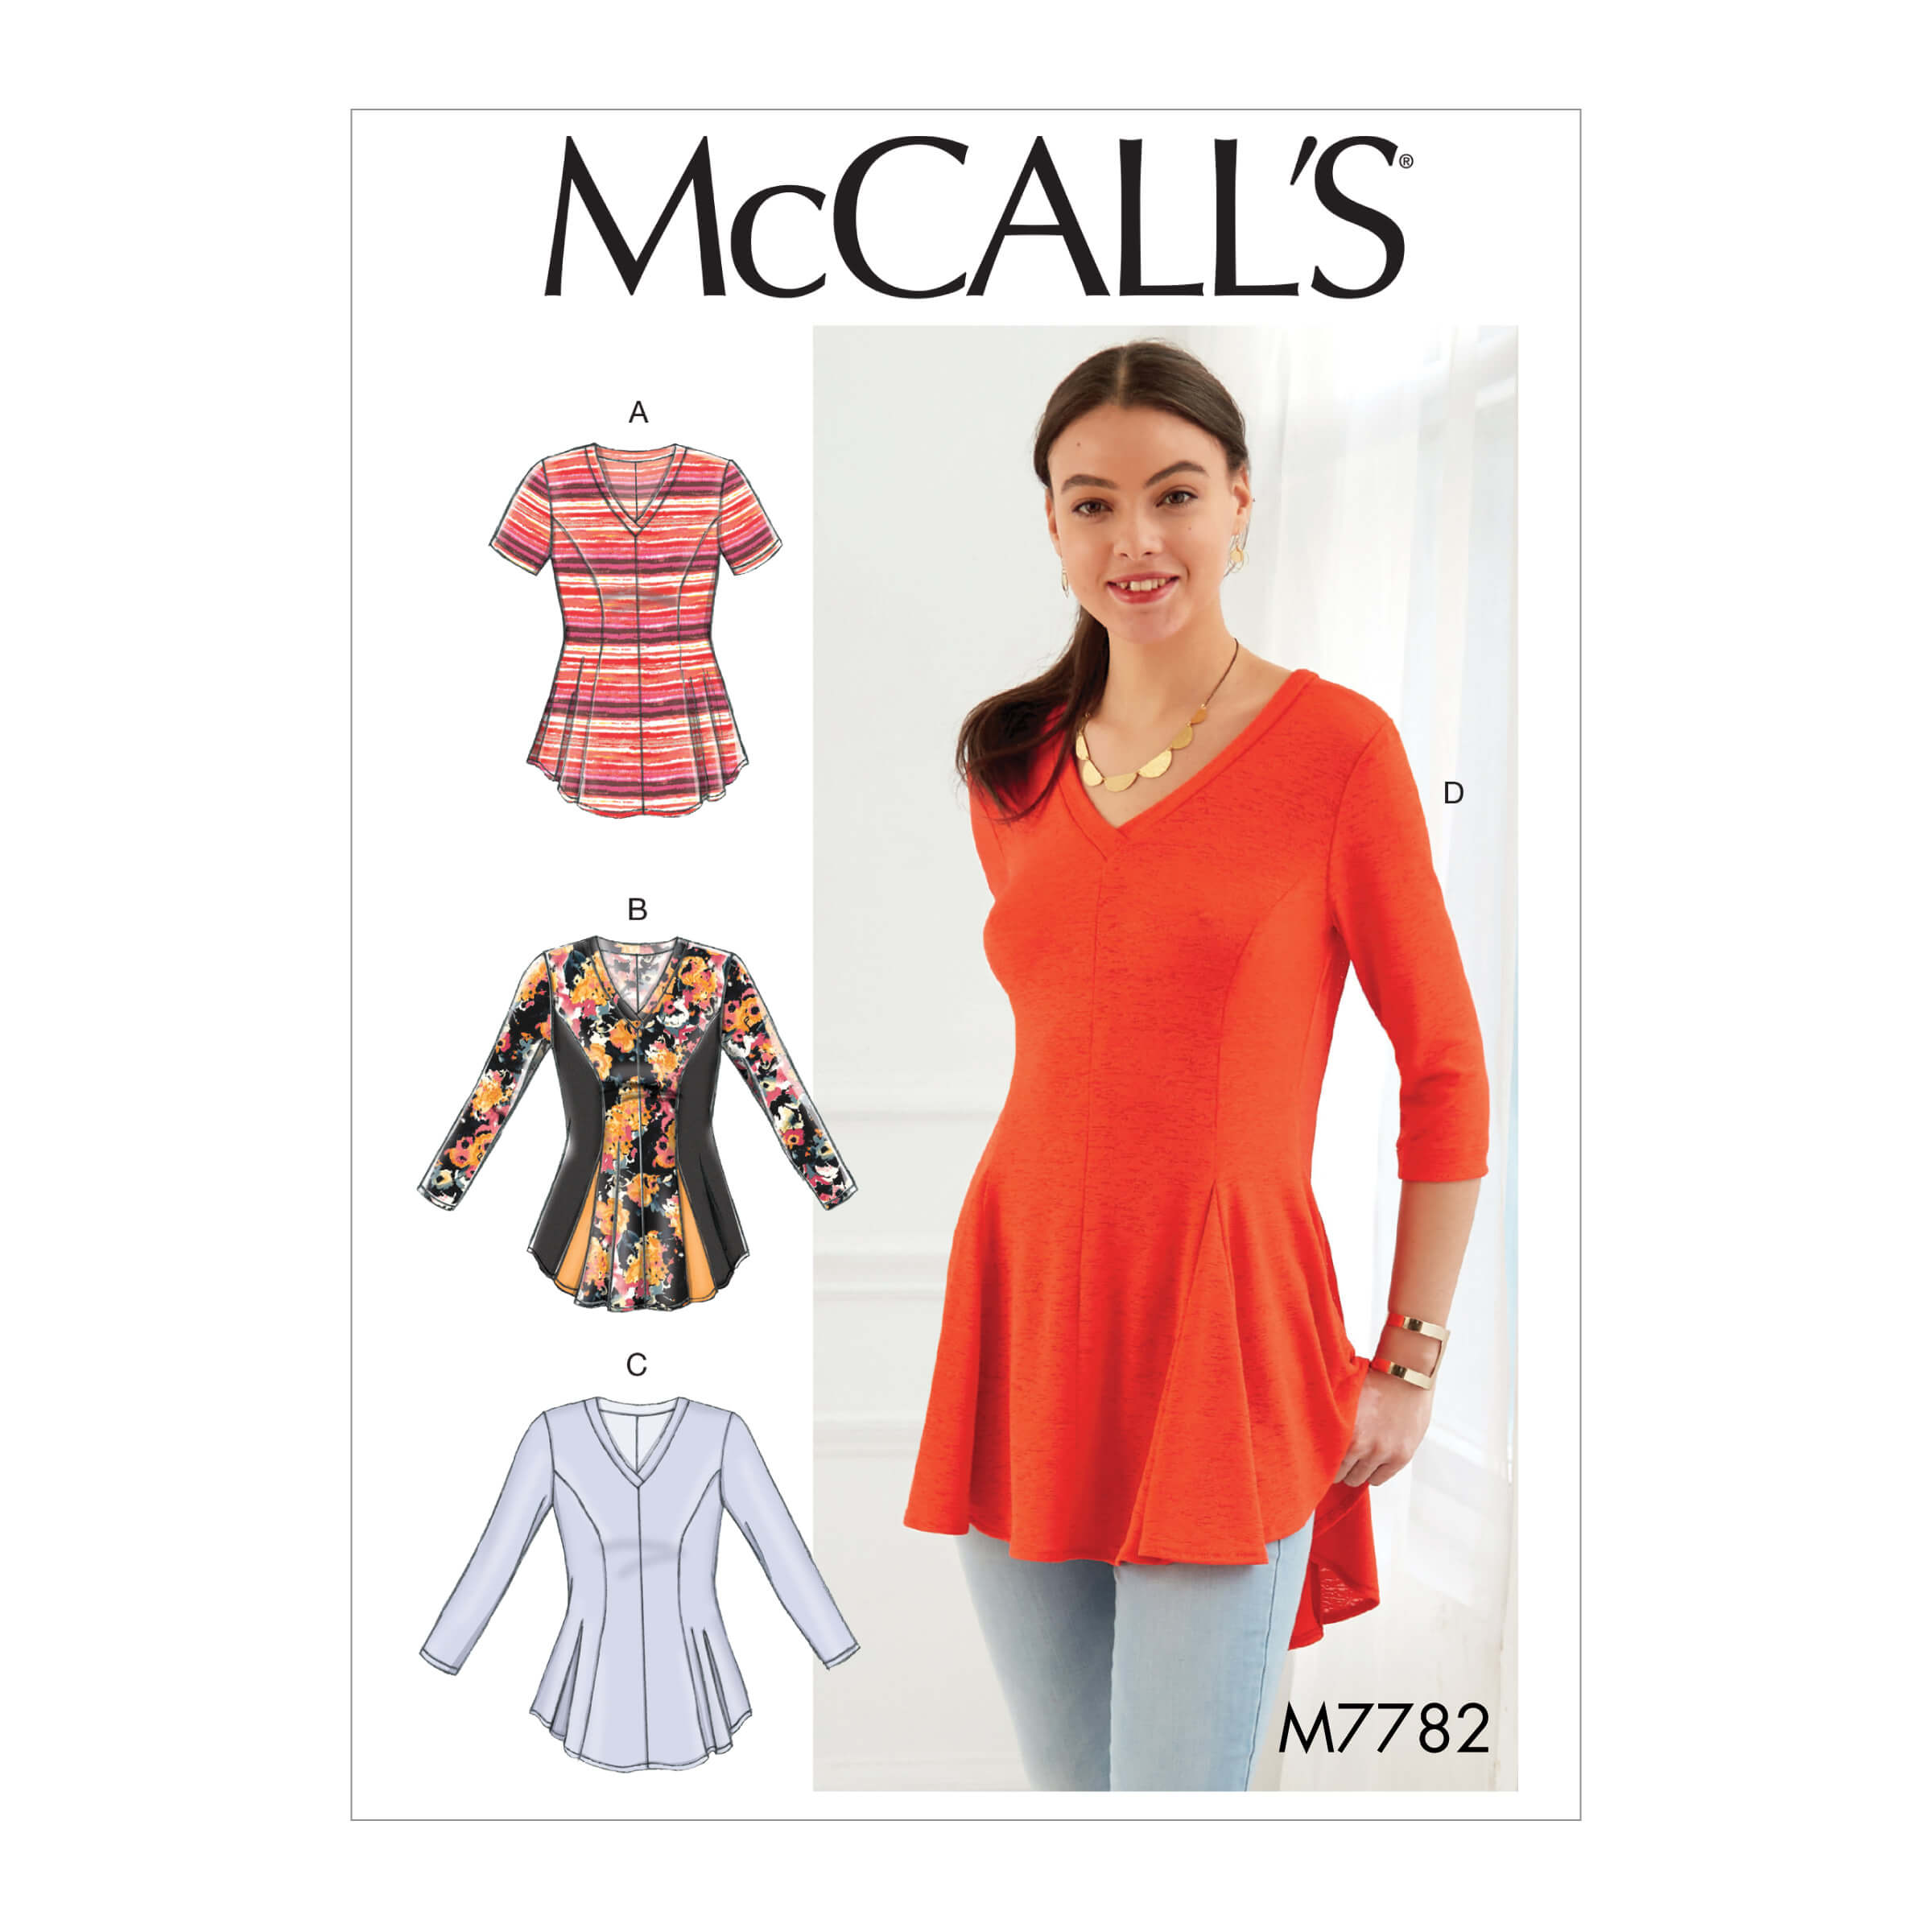 McCall's Sewing Pattern M7782 Misses'/Women's Tops